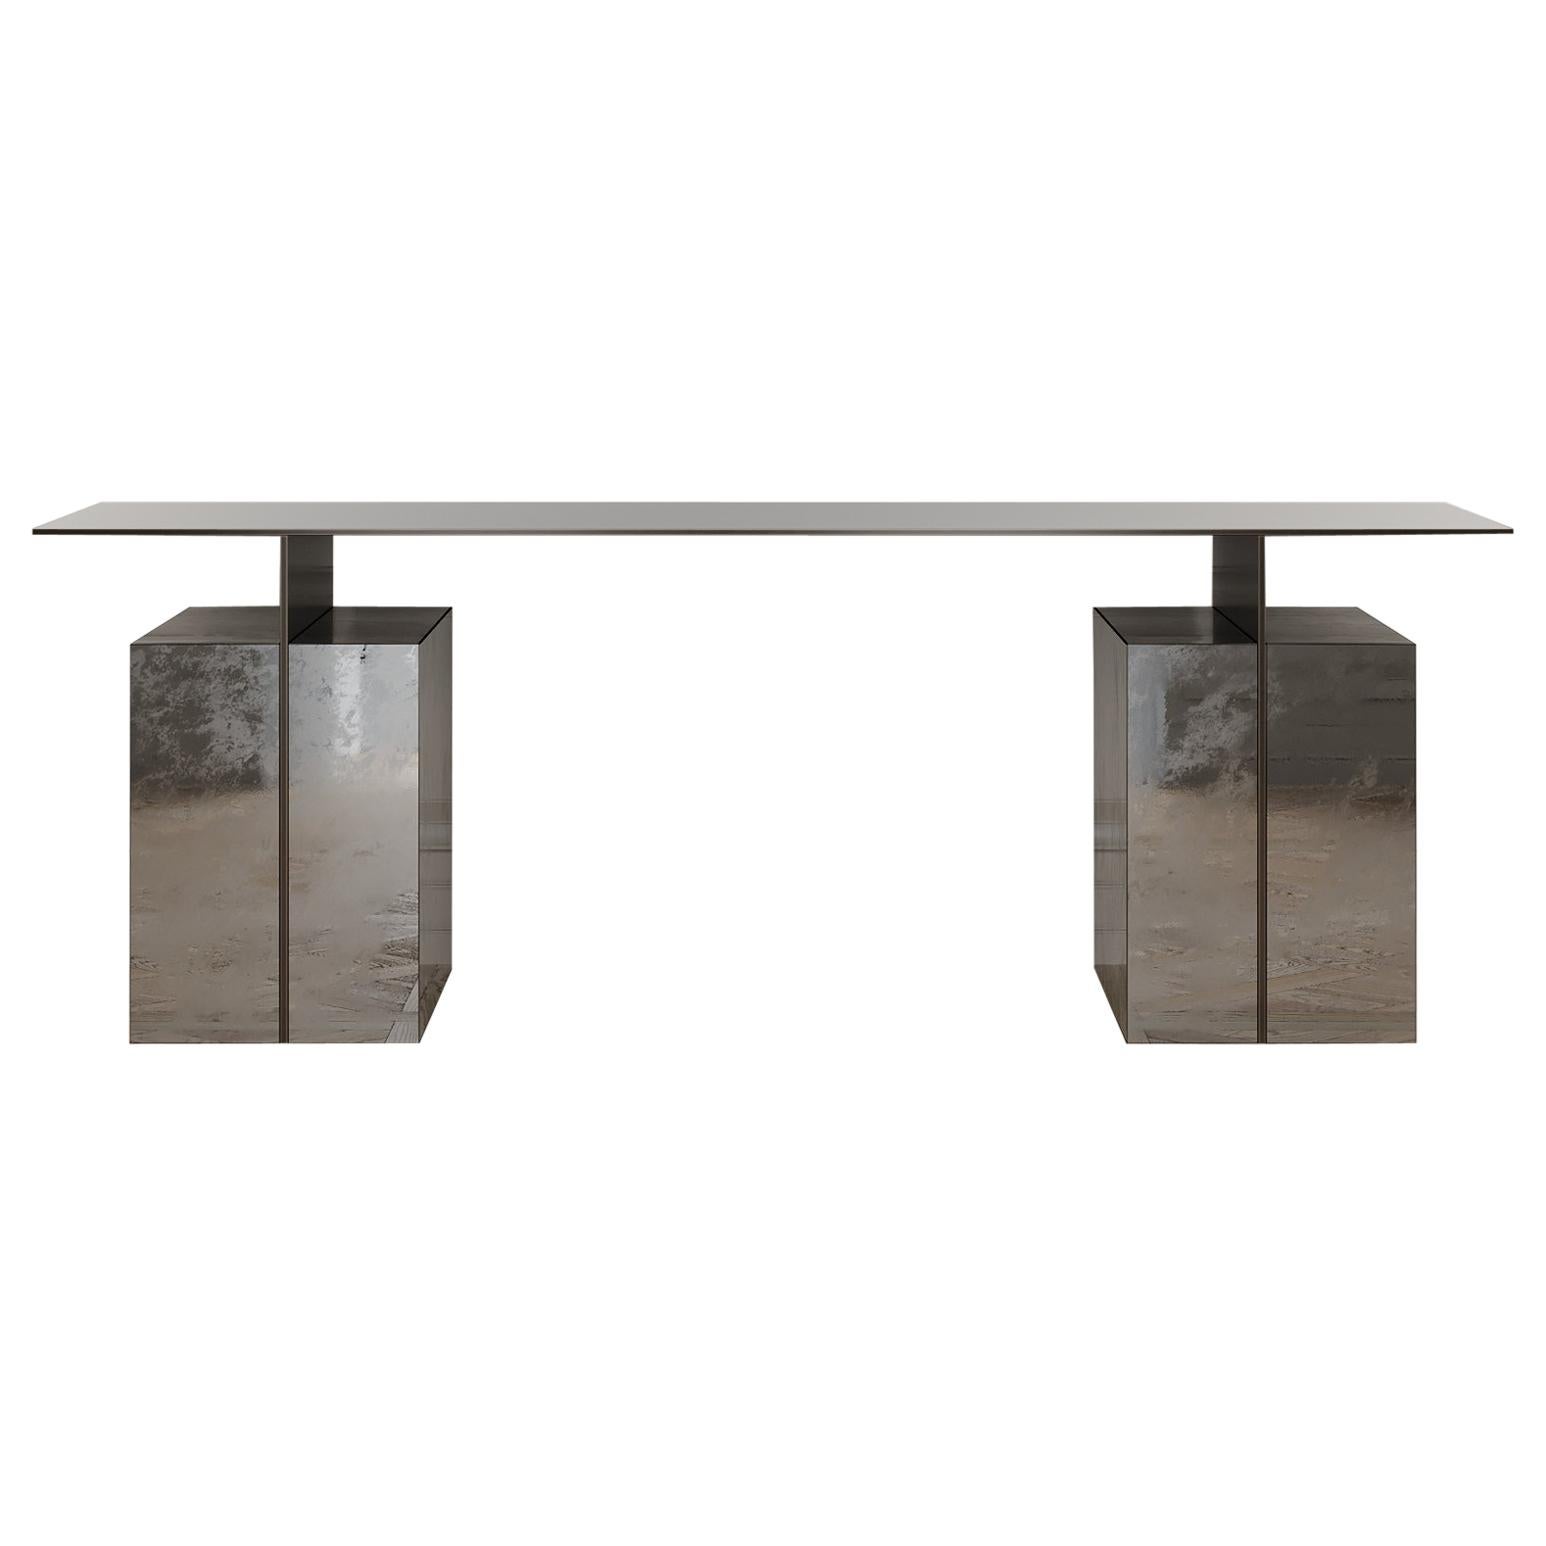 Meridiem Desk of Antiqued Mirror and Patinated Steel, Made in Italy For Sale